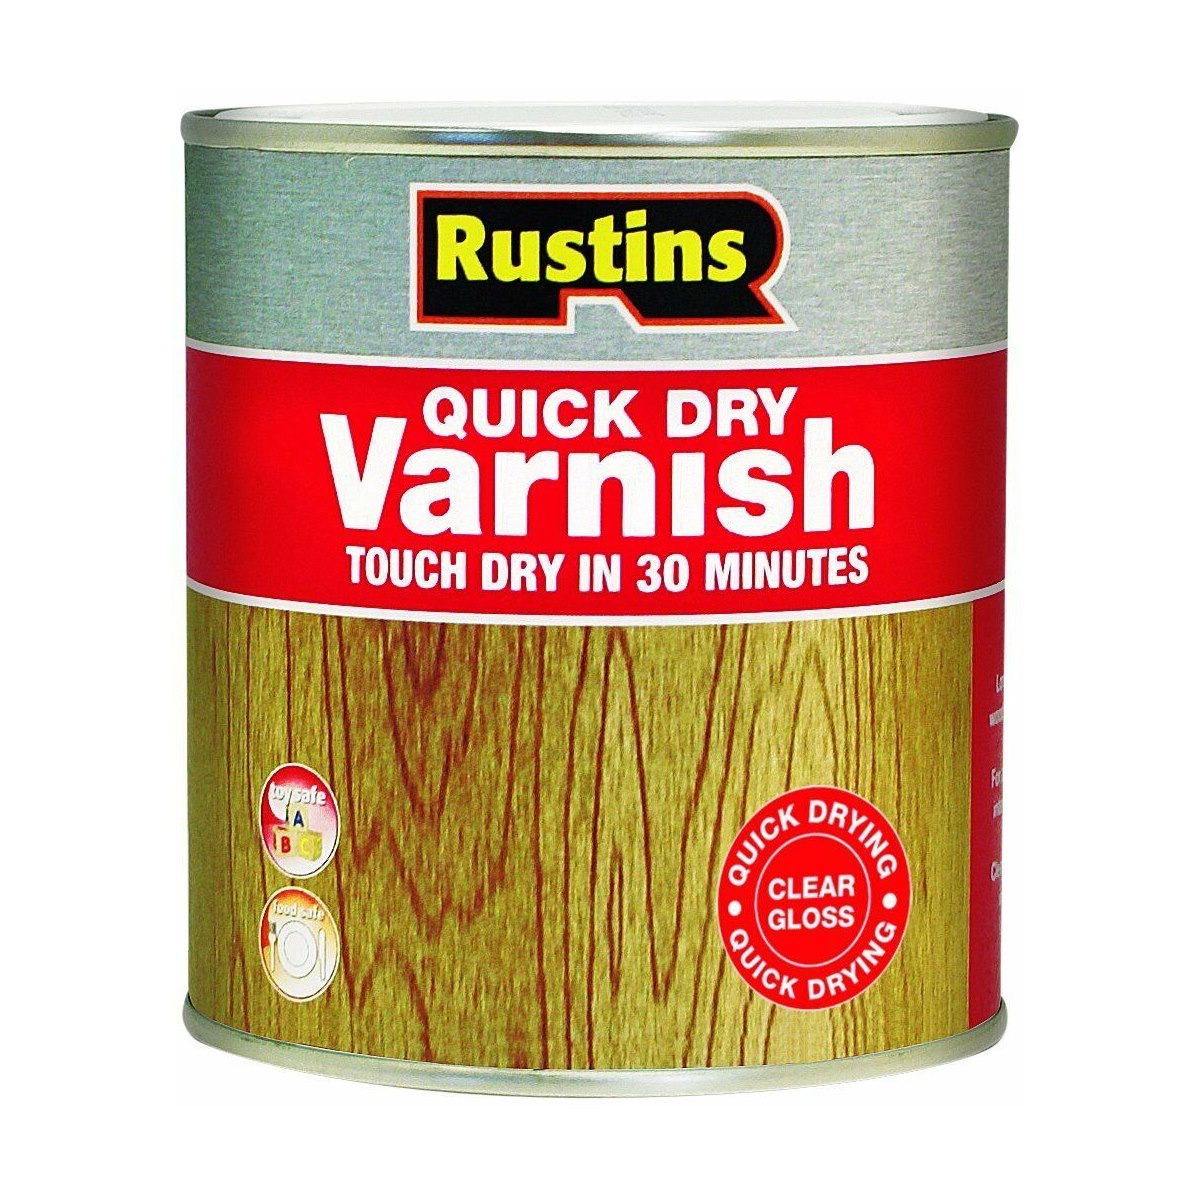 Rustins Quick Dry Varnish Gloss Clear 1 Litre